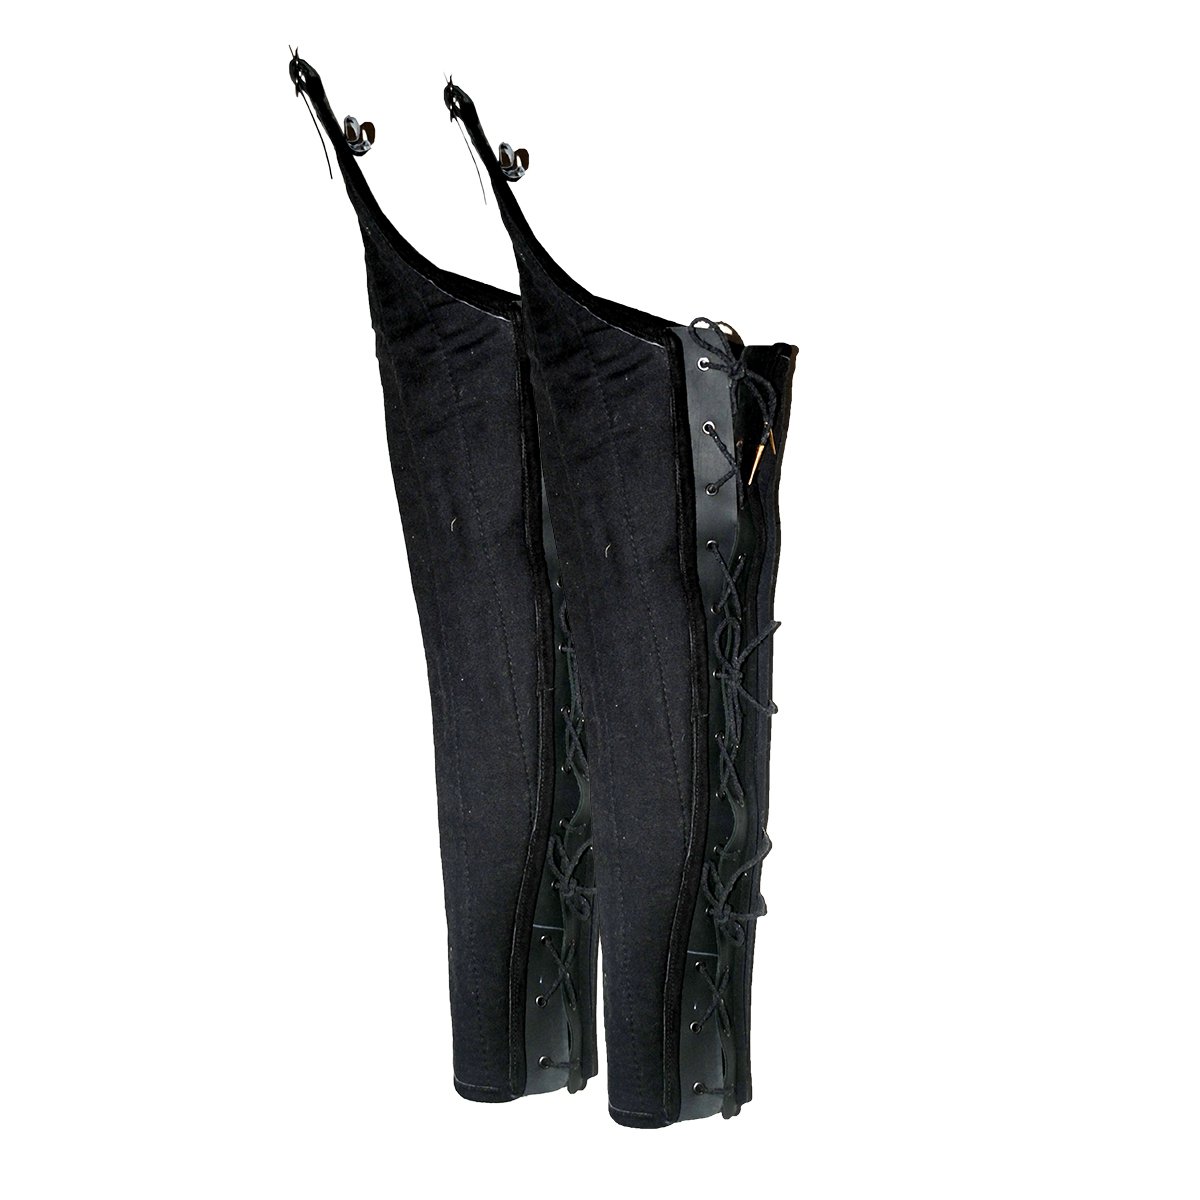 Crusader Padded Trousers - black, Size L